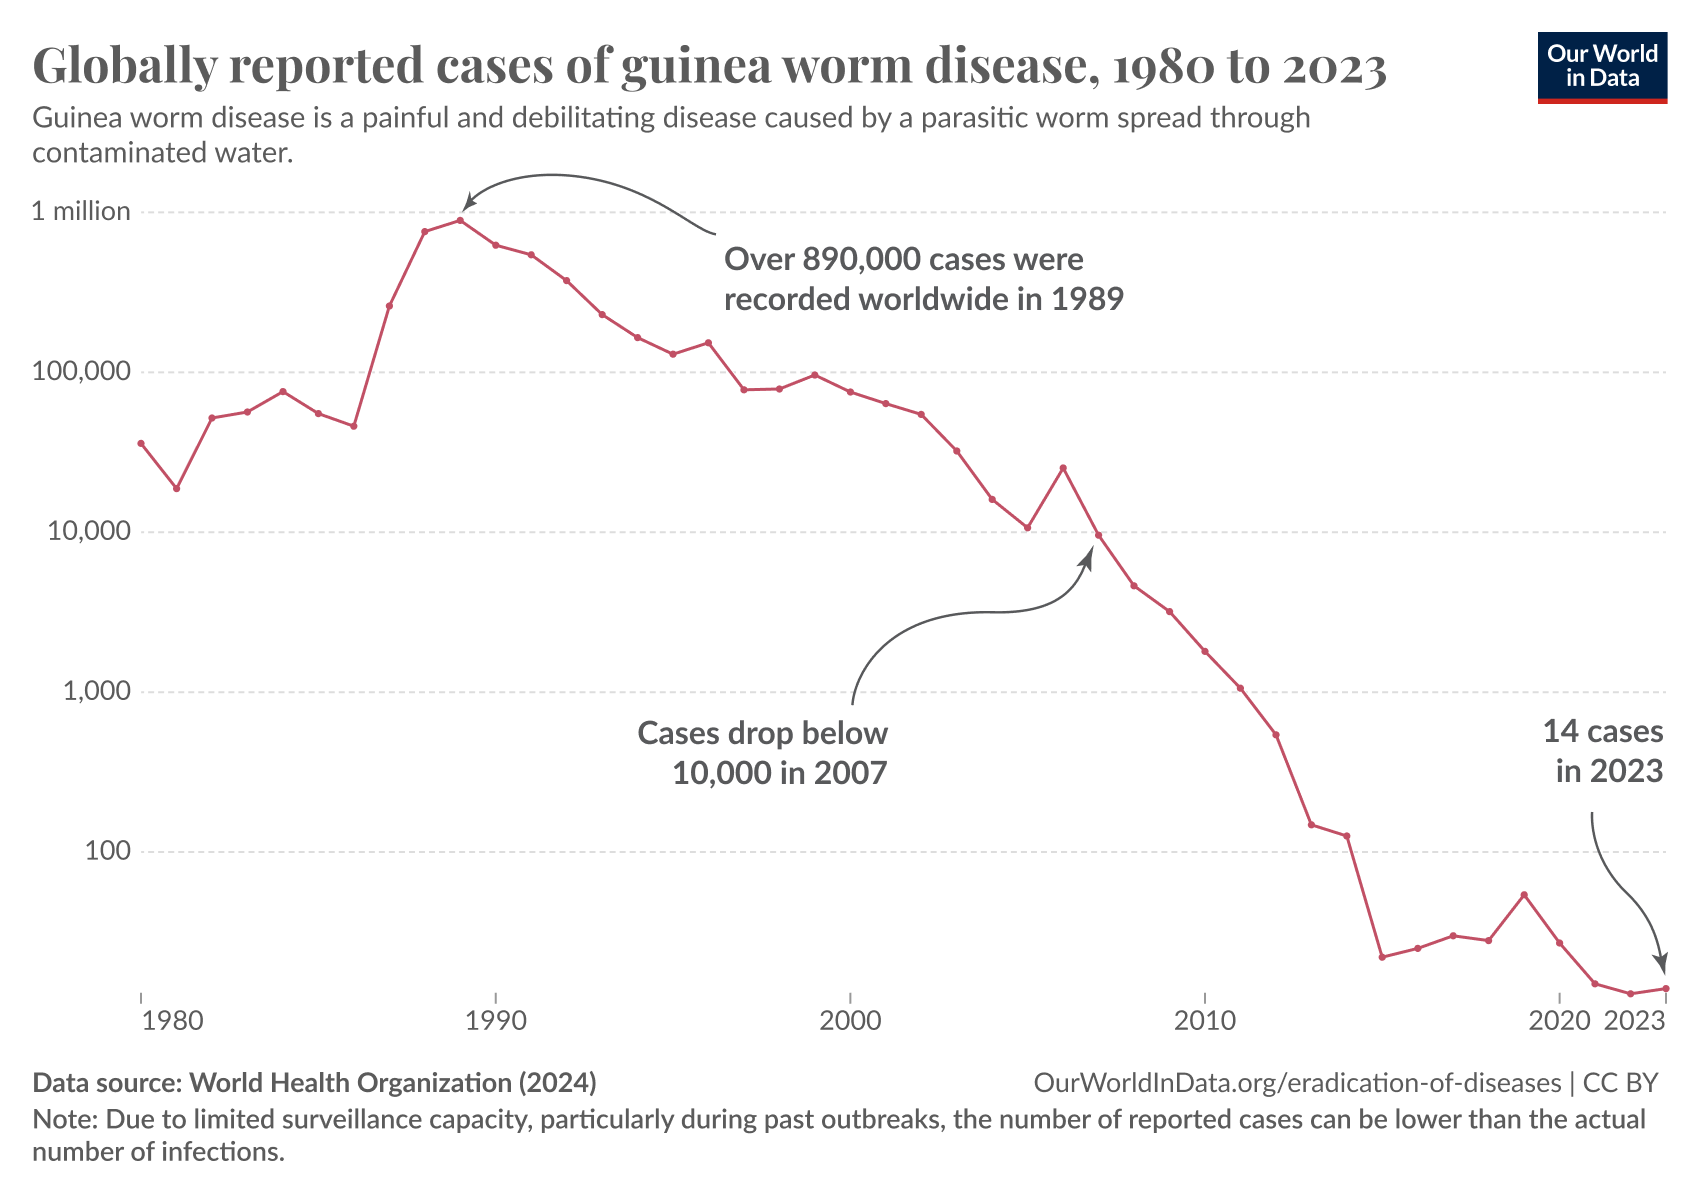 A line chart showing the development of reported guinea worm cases worldwide between 1980 and 2023. It has a logarithmic y-axis showing the number of cases. The line peaks in the late 1980s at around 900,000 cases and falls significantly after that. Since the mid 2010s, case numbers are stagnating in the low two digits.